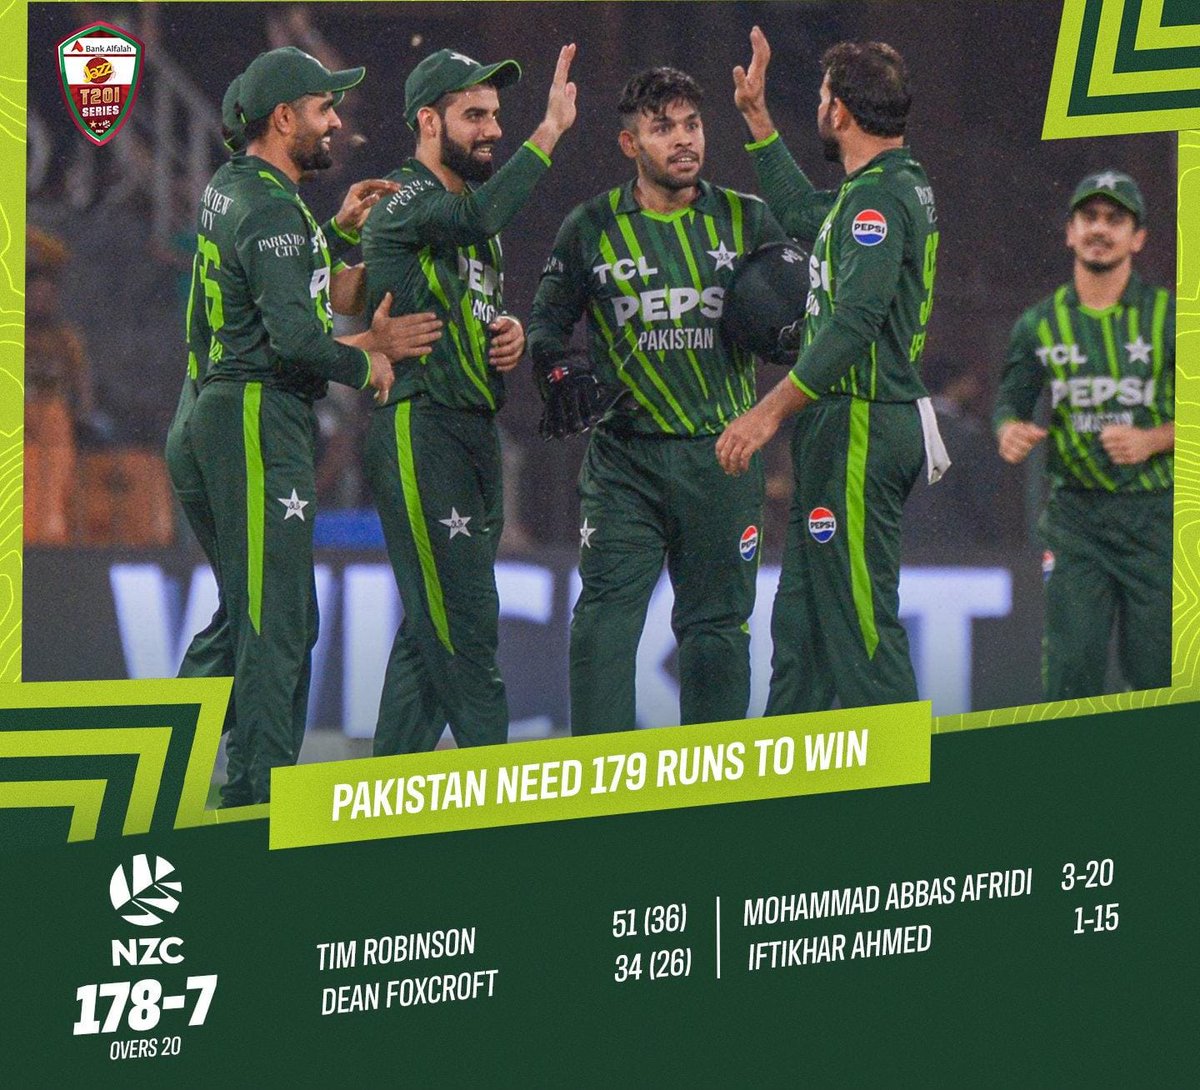 Will Pakistan be able to chase this score? #PAKvNZ #PakistanCricket